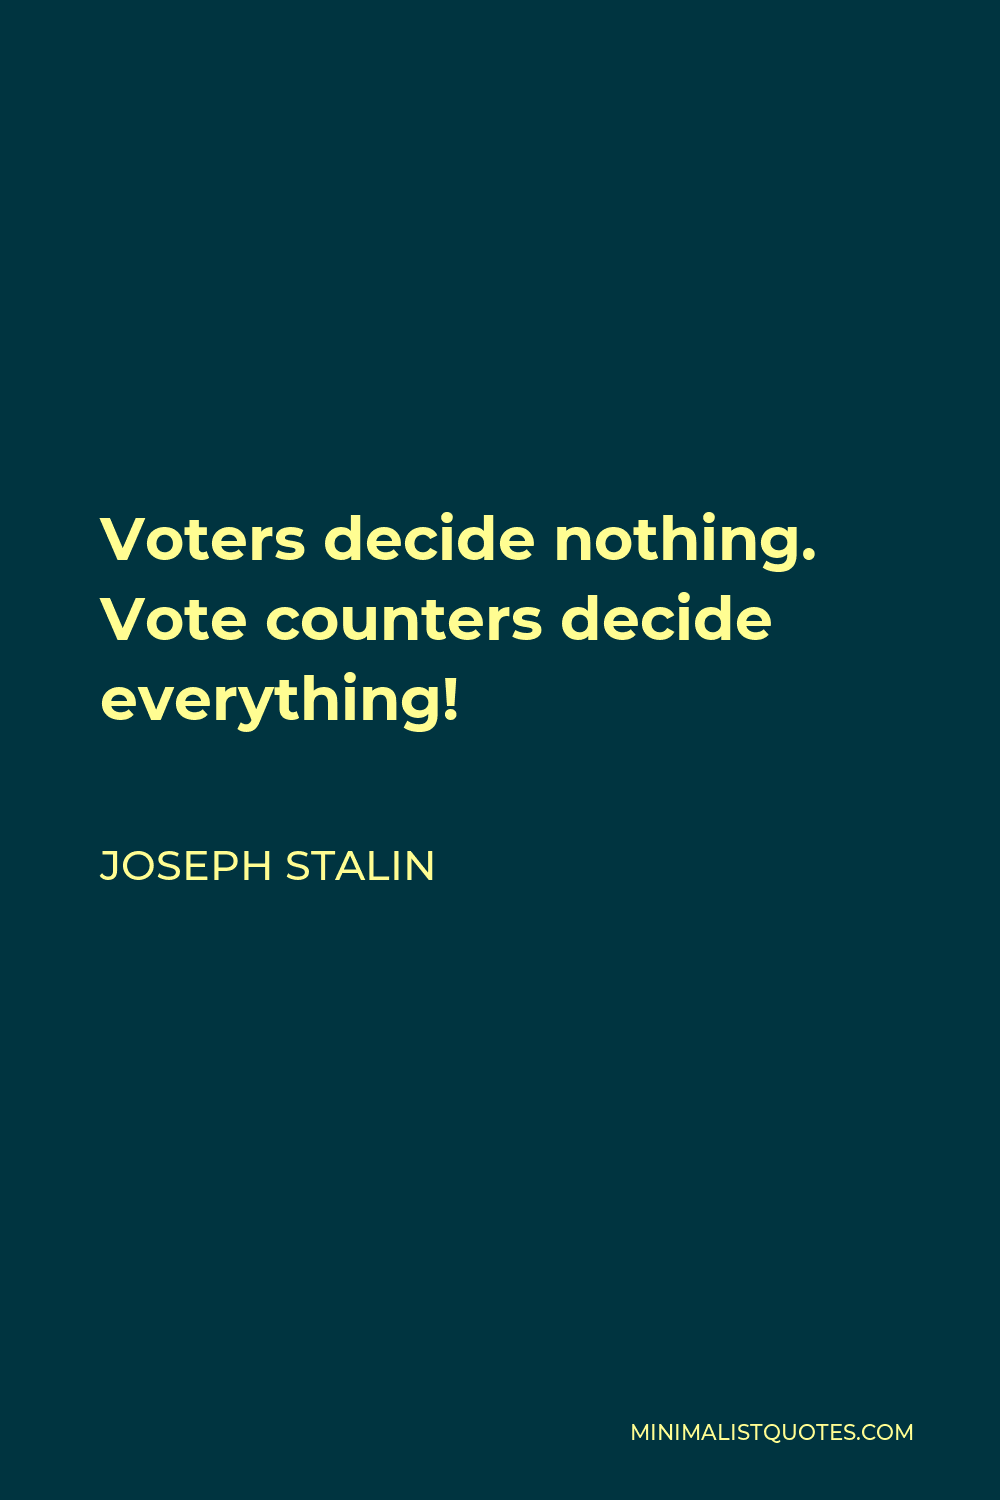 Joseph Stalin Quote - Voters decide nothing. Vote counters decide everything!